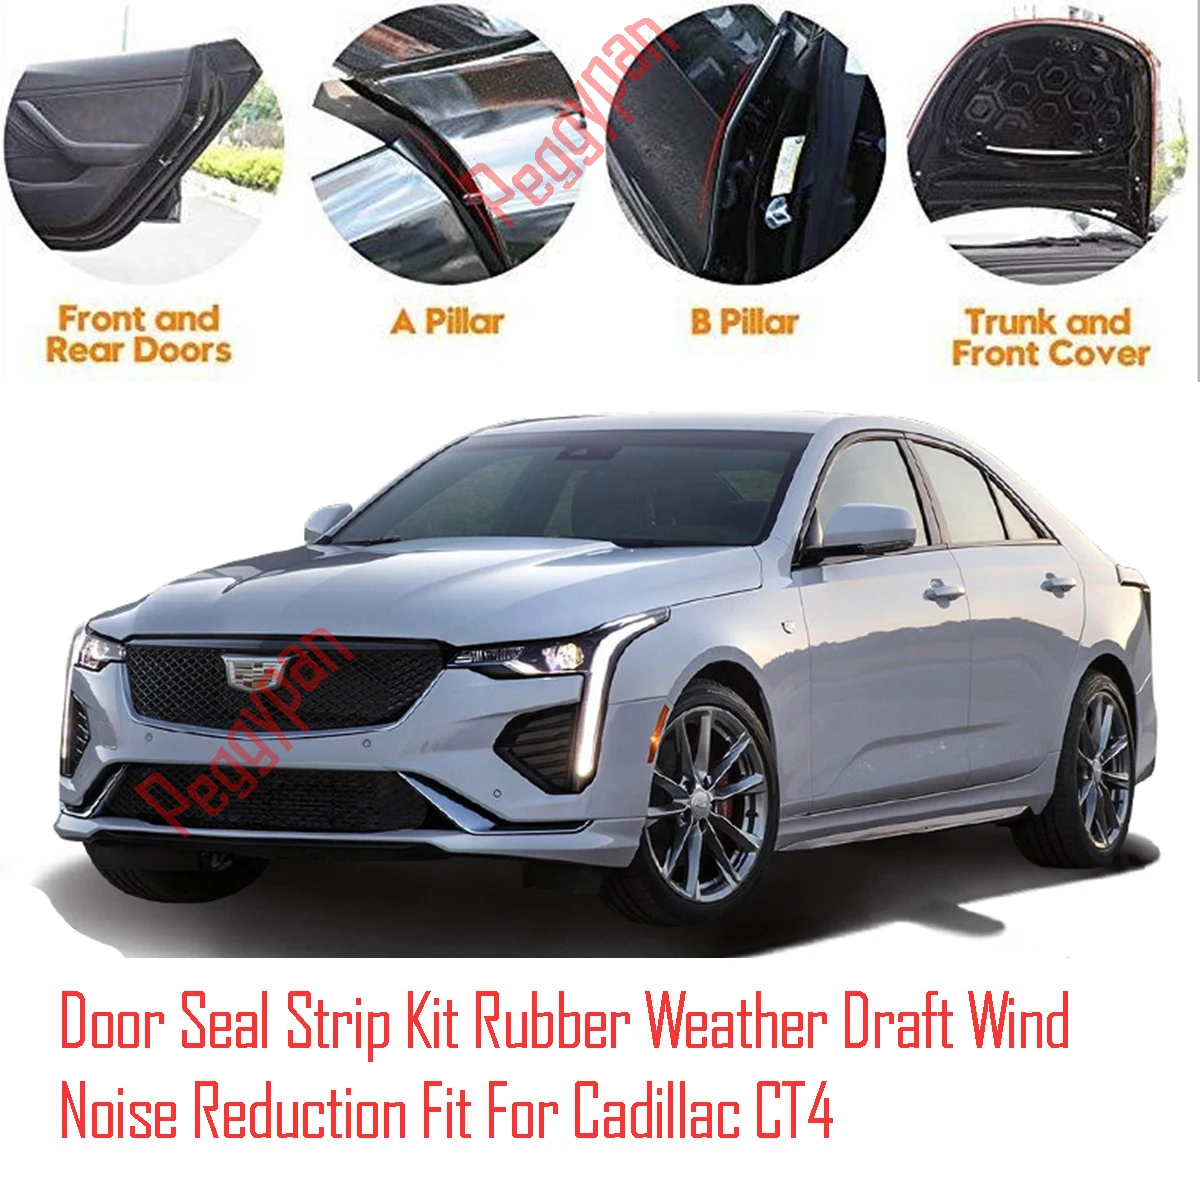 Door Seal Strip Kit Self Adhesive Window Engine Cover Soundproof Rubber Weather Draft Wind Noise Reduction Fit For Cadillac CT4